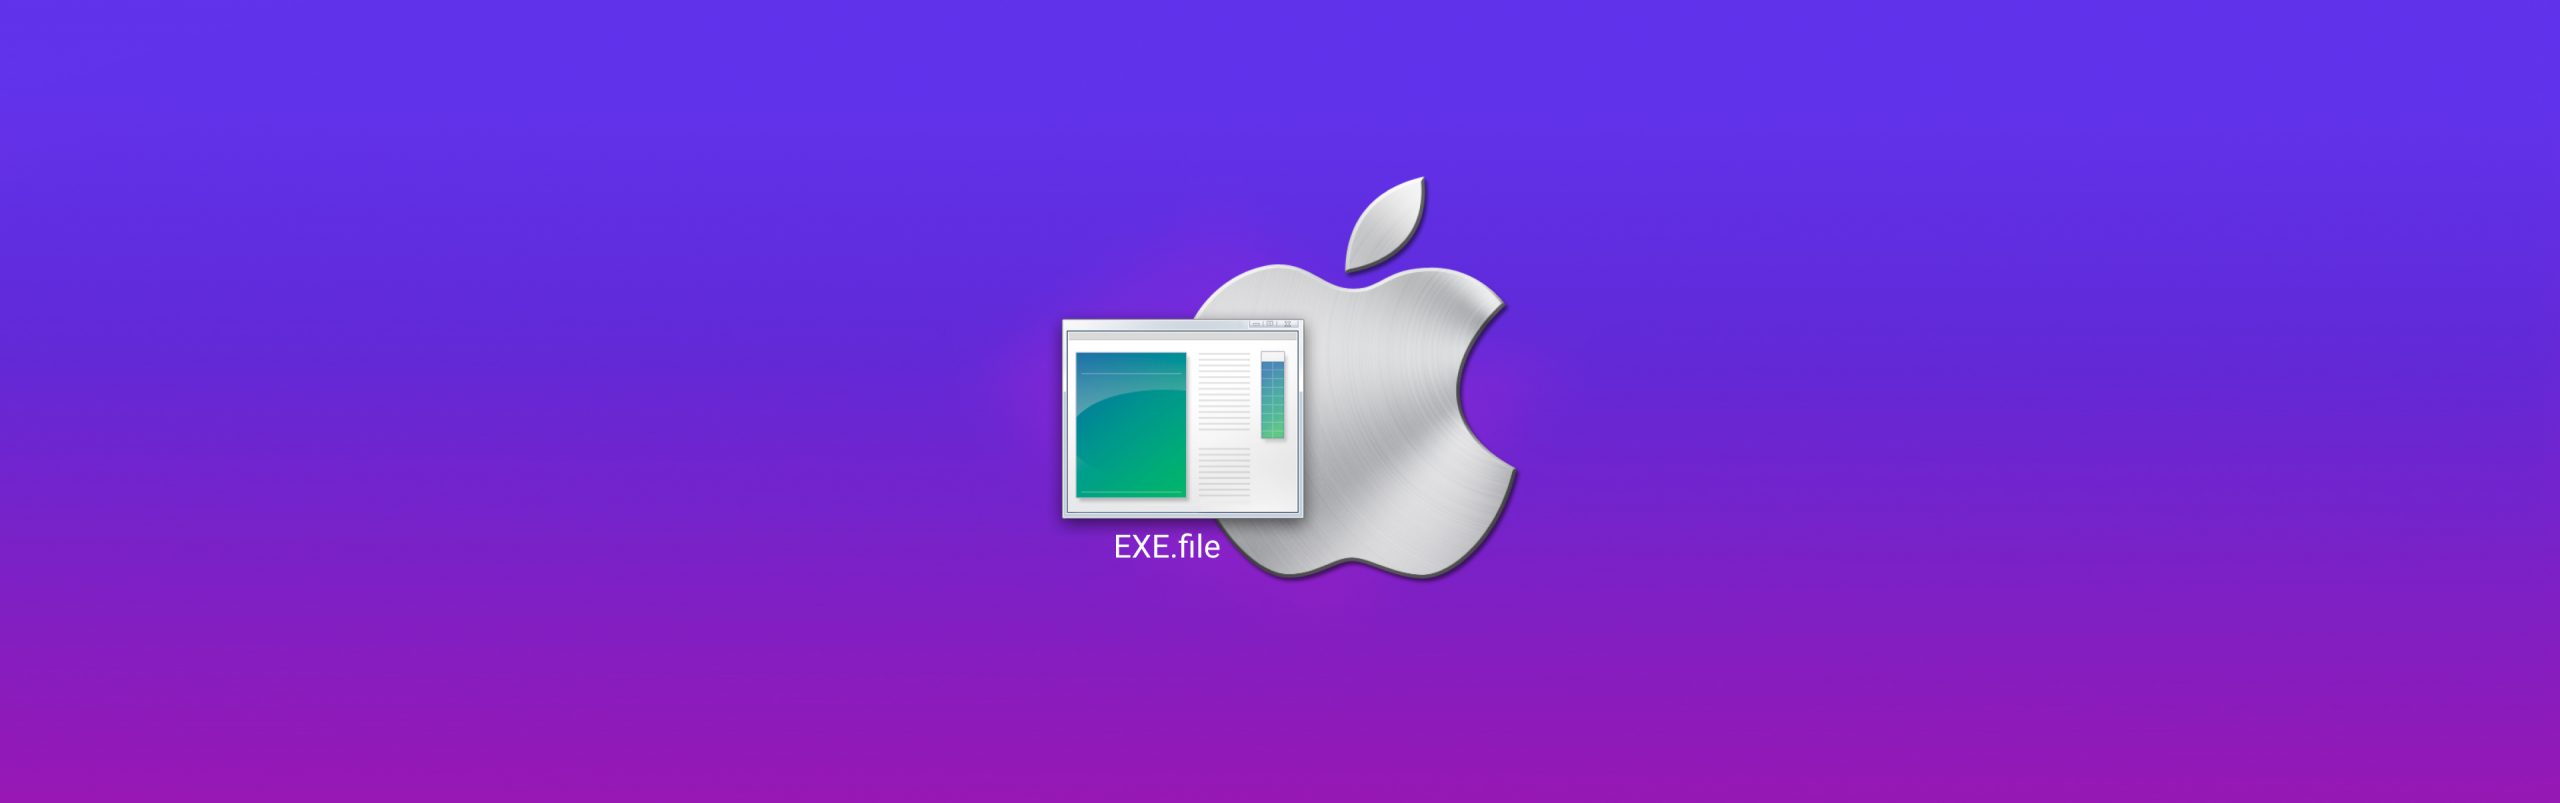 exe to app converter for mac